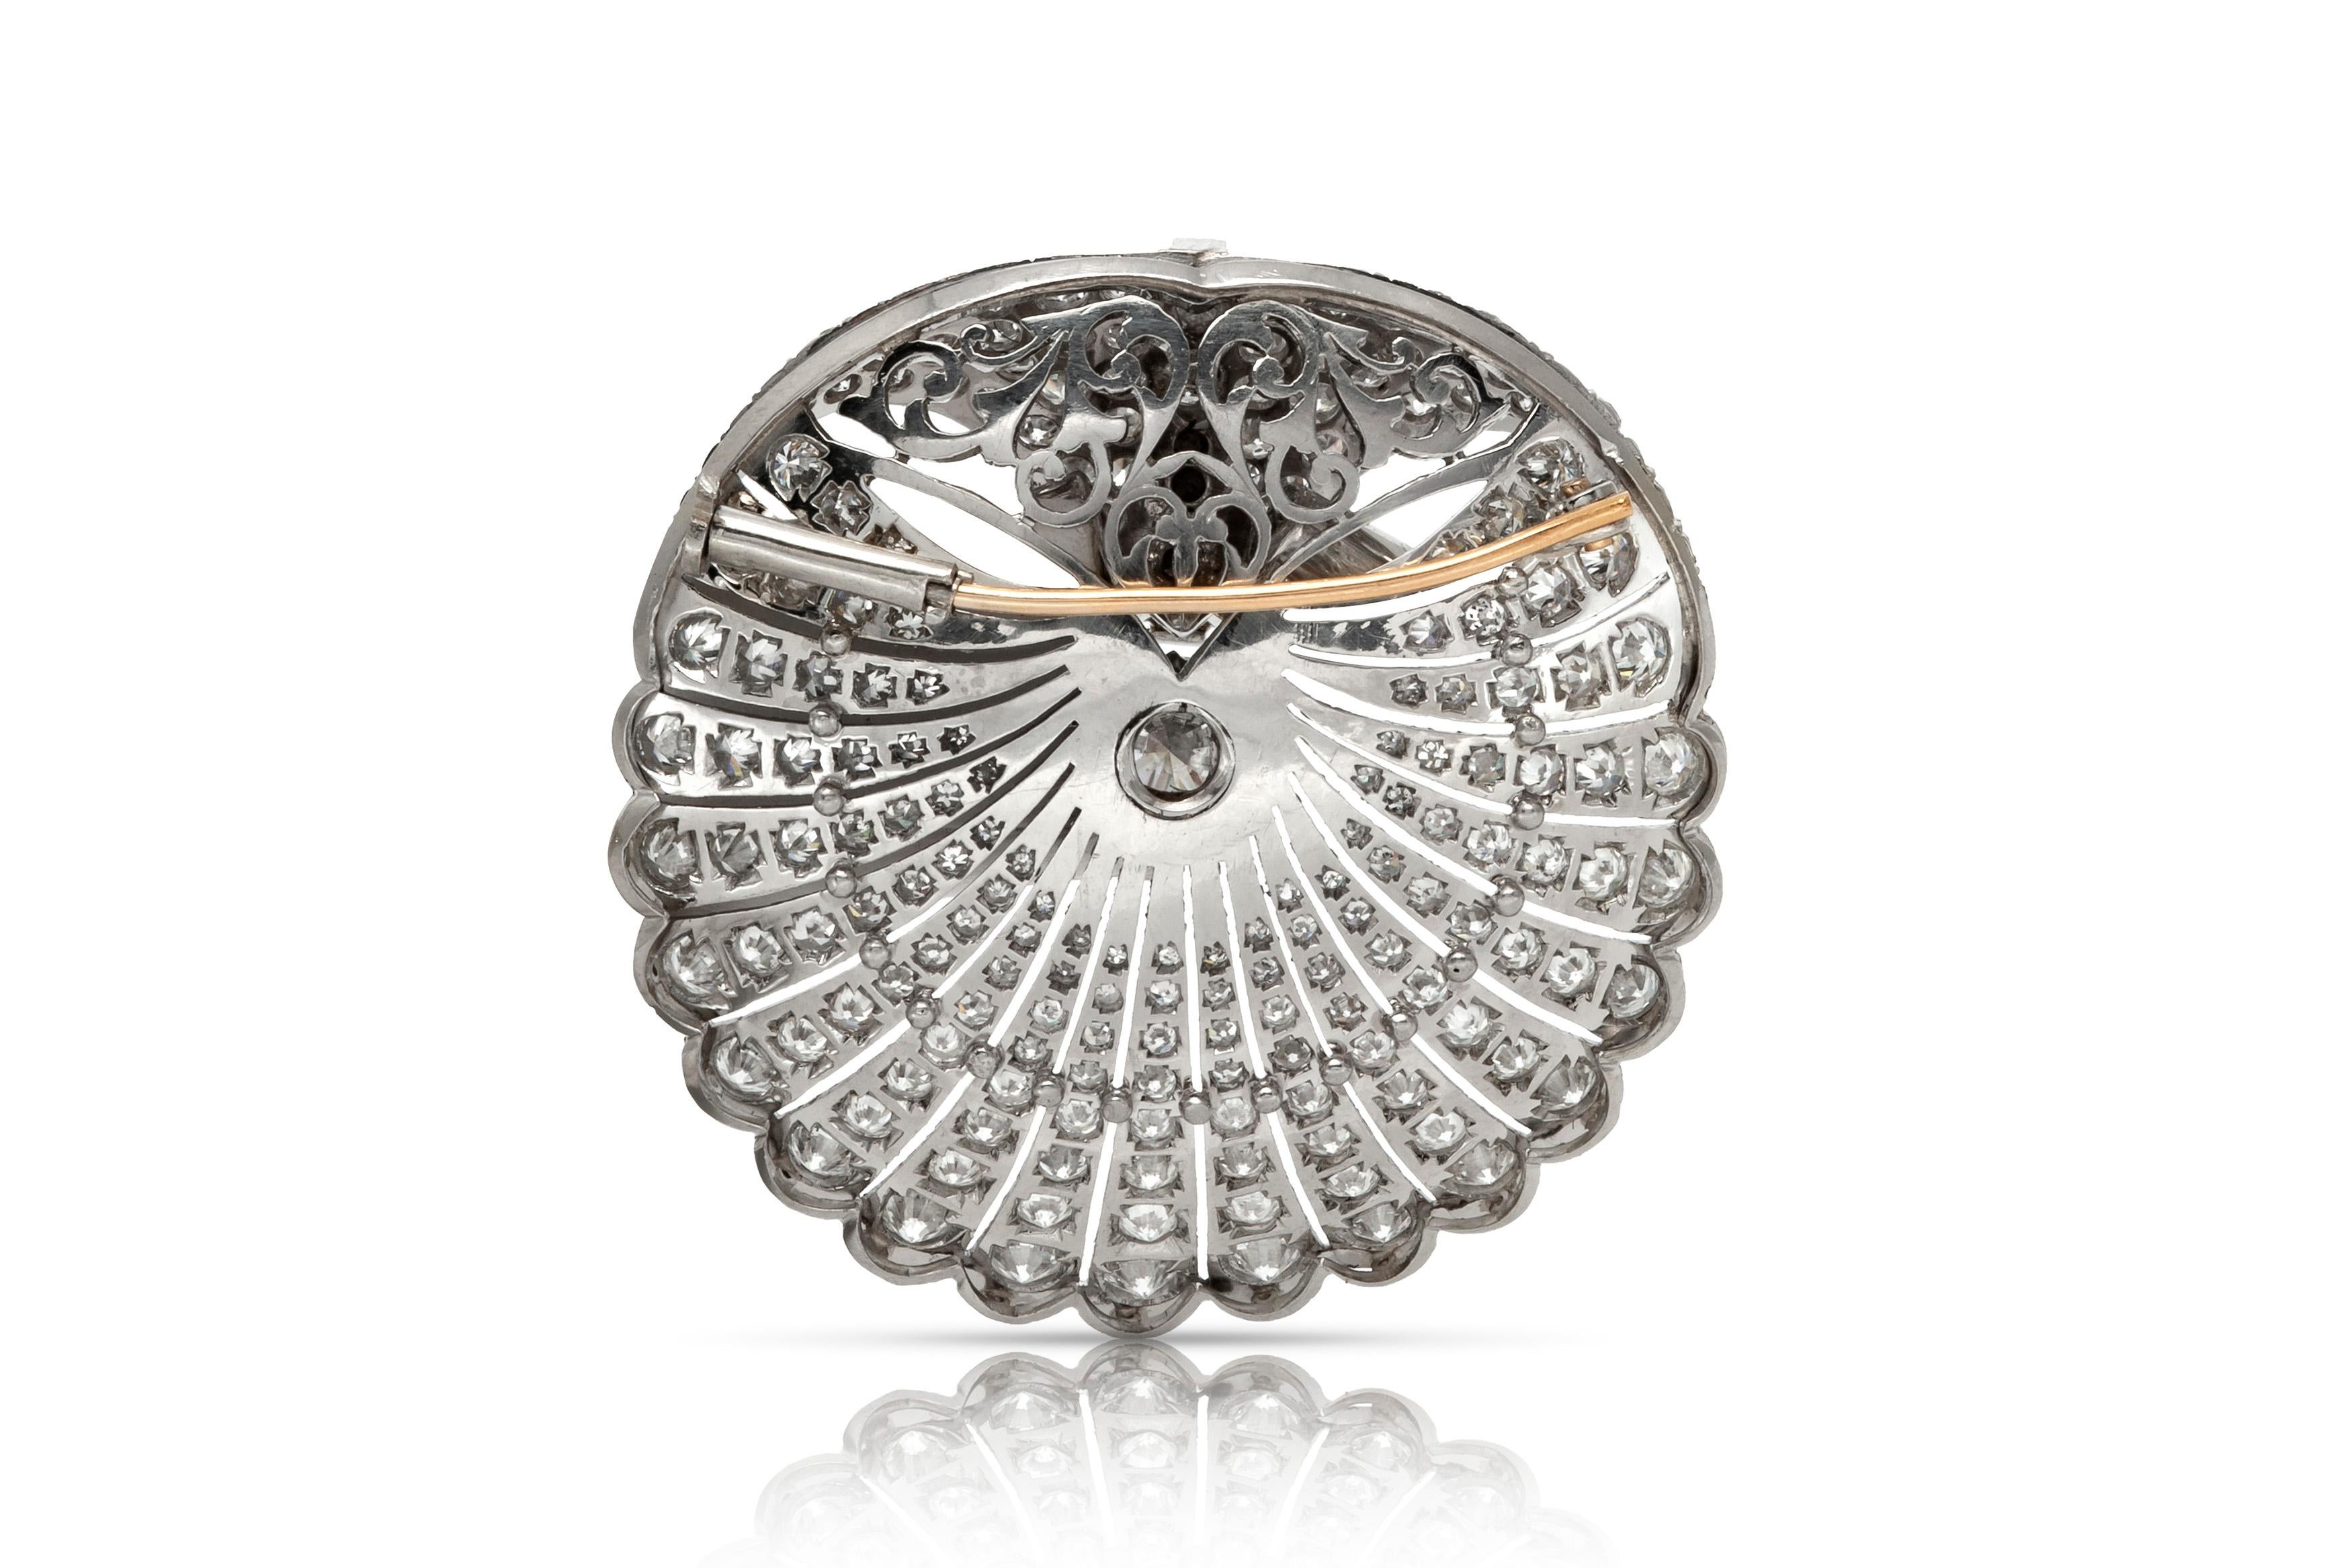 Finely crafted in plainum with a center round cut diamond weighing 1.48 carats.
The brooch features round cut diamonds weighing a total of approximately 20.00 carats.